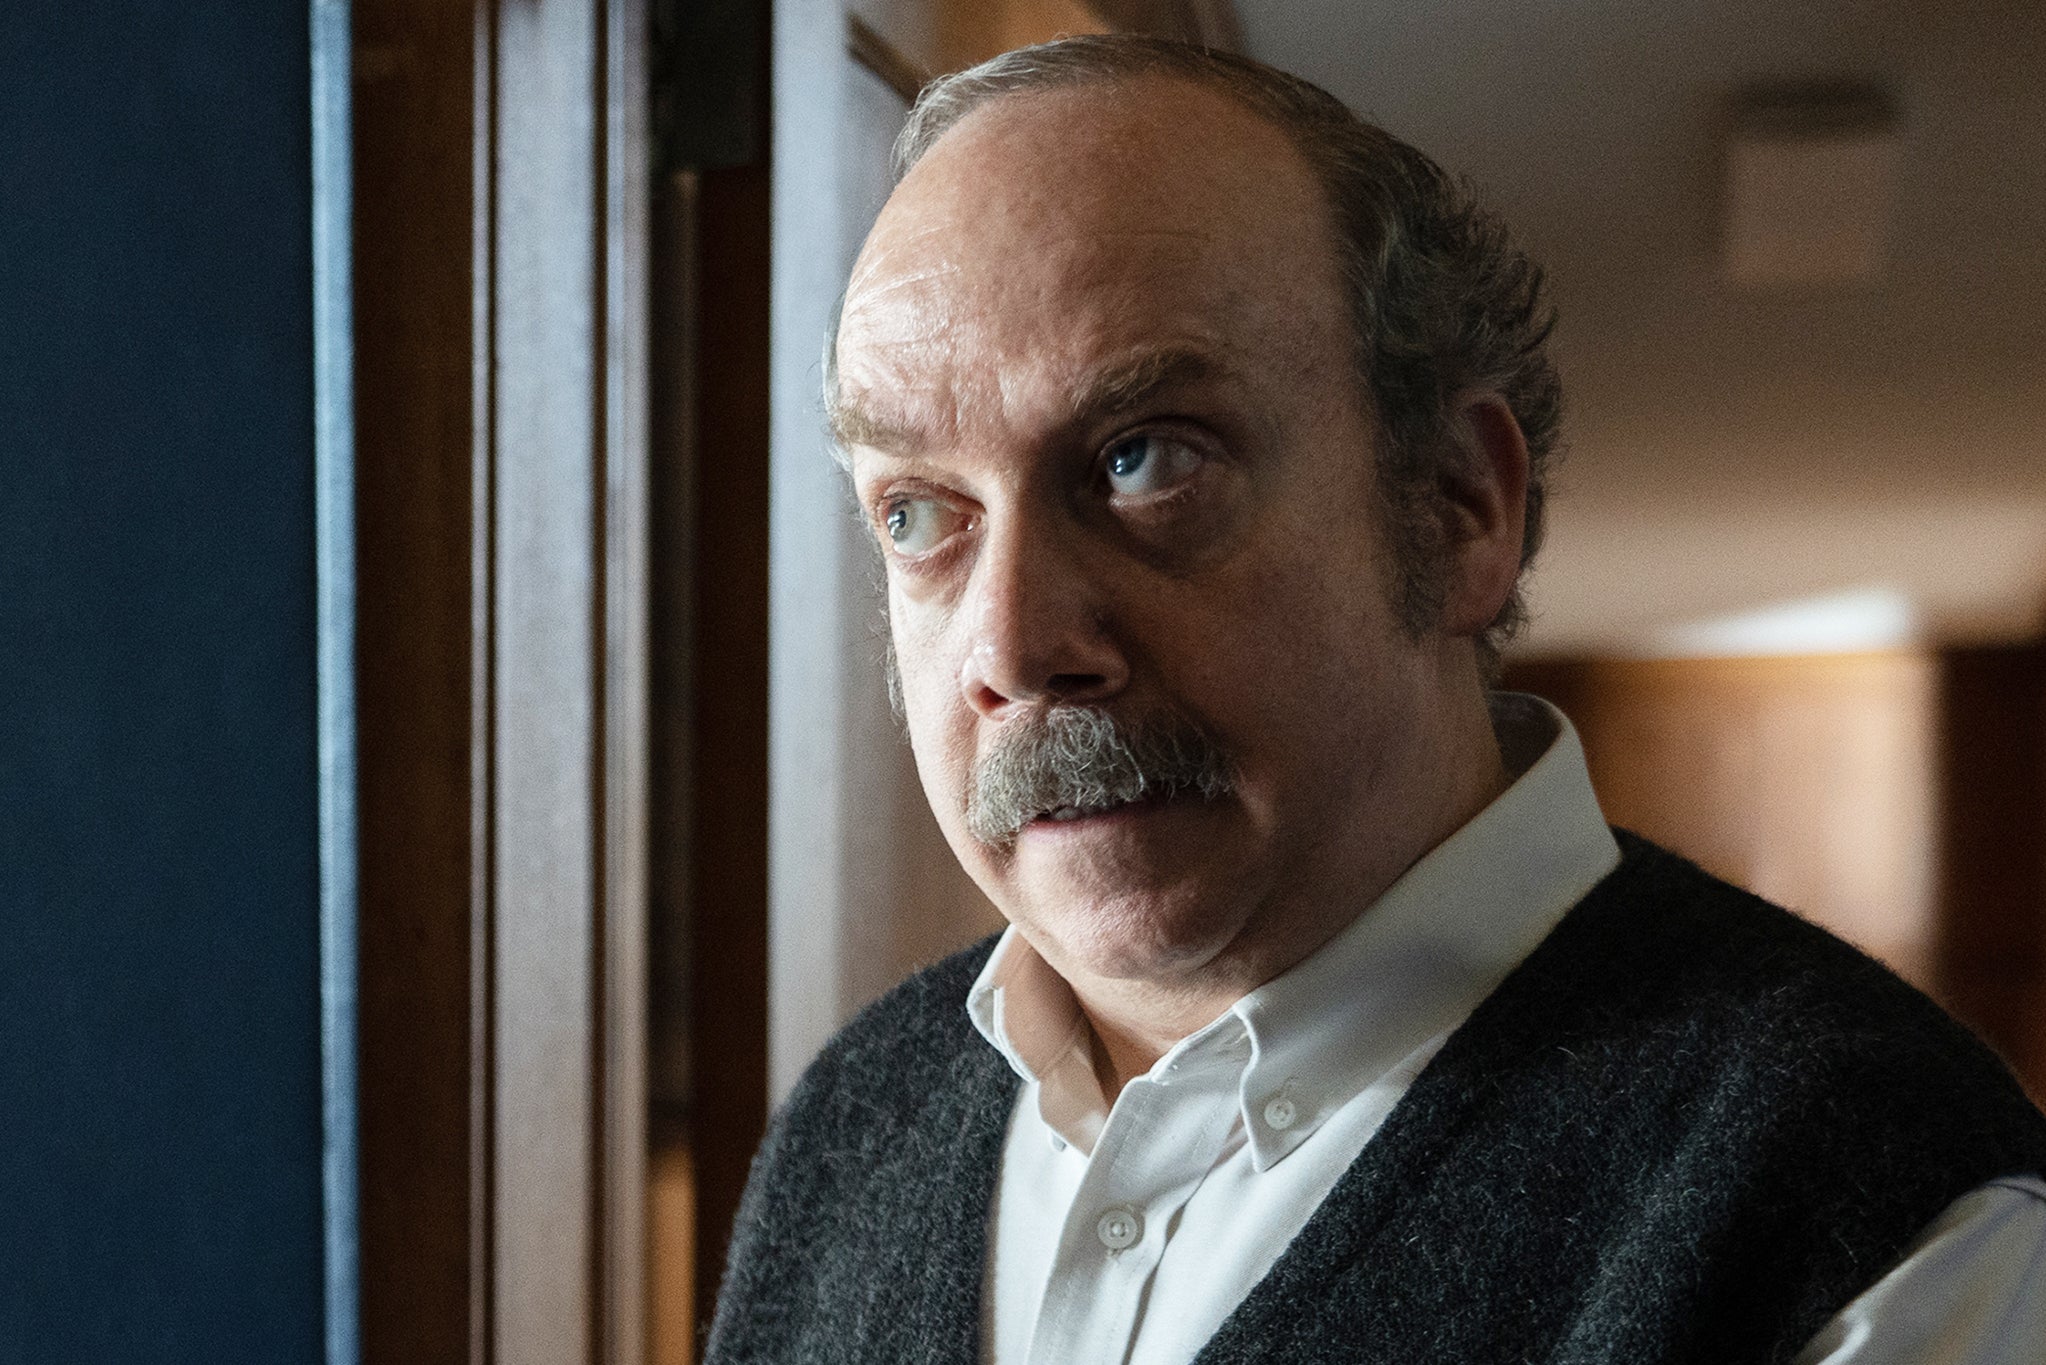 Smell blessings: Paul Giamatti in ‘The Holdovers'